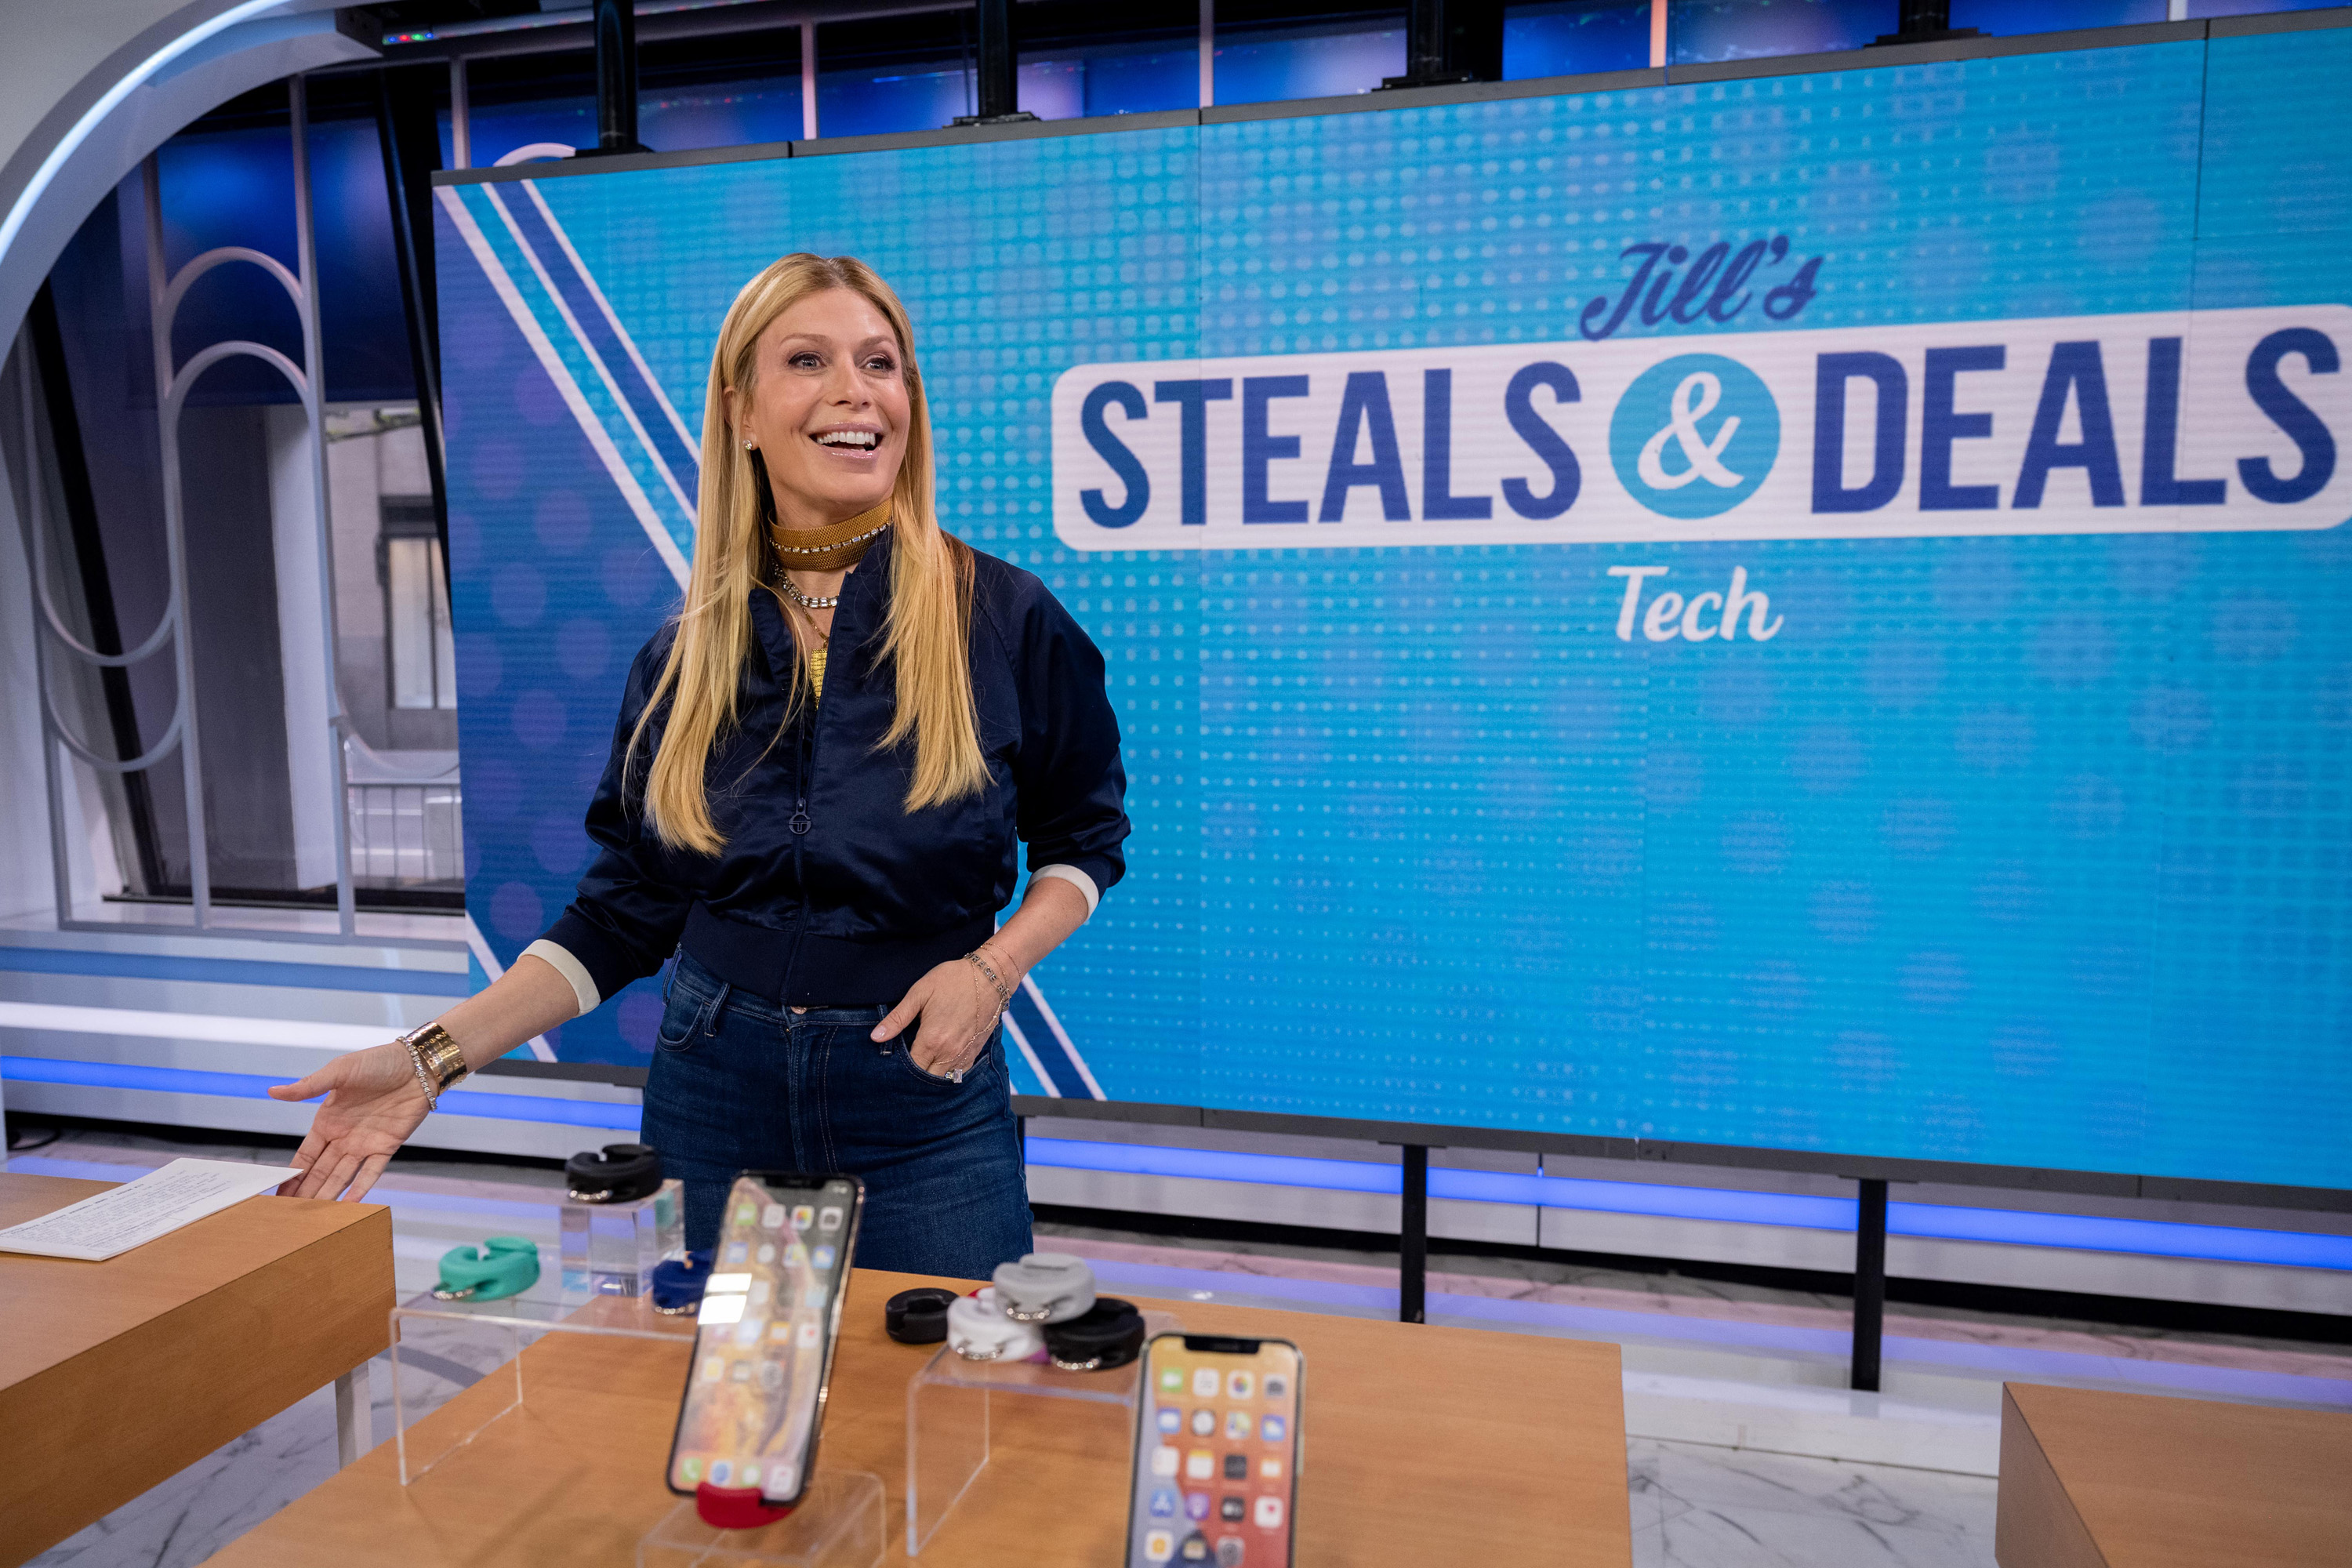 Jill appears on Today for Steals & Deals Segment from time to time and also fills in for Third Hour hosts sometimes when they are absent